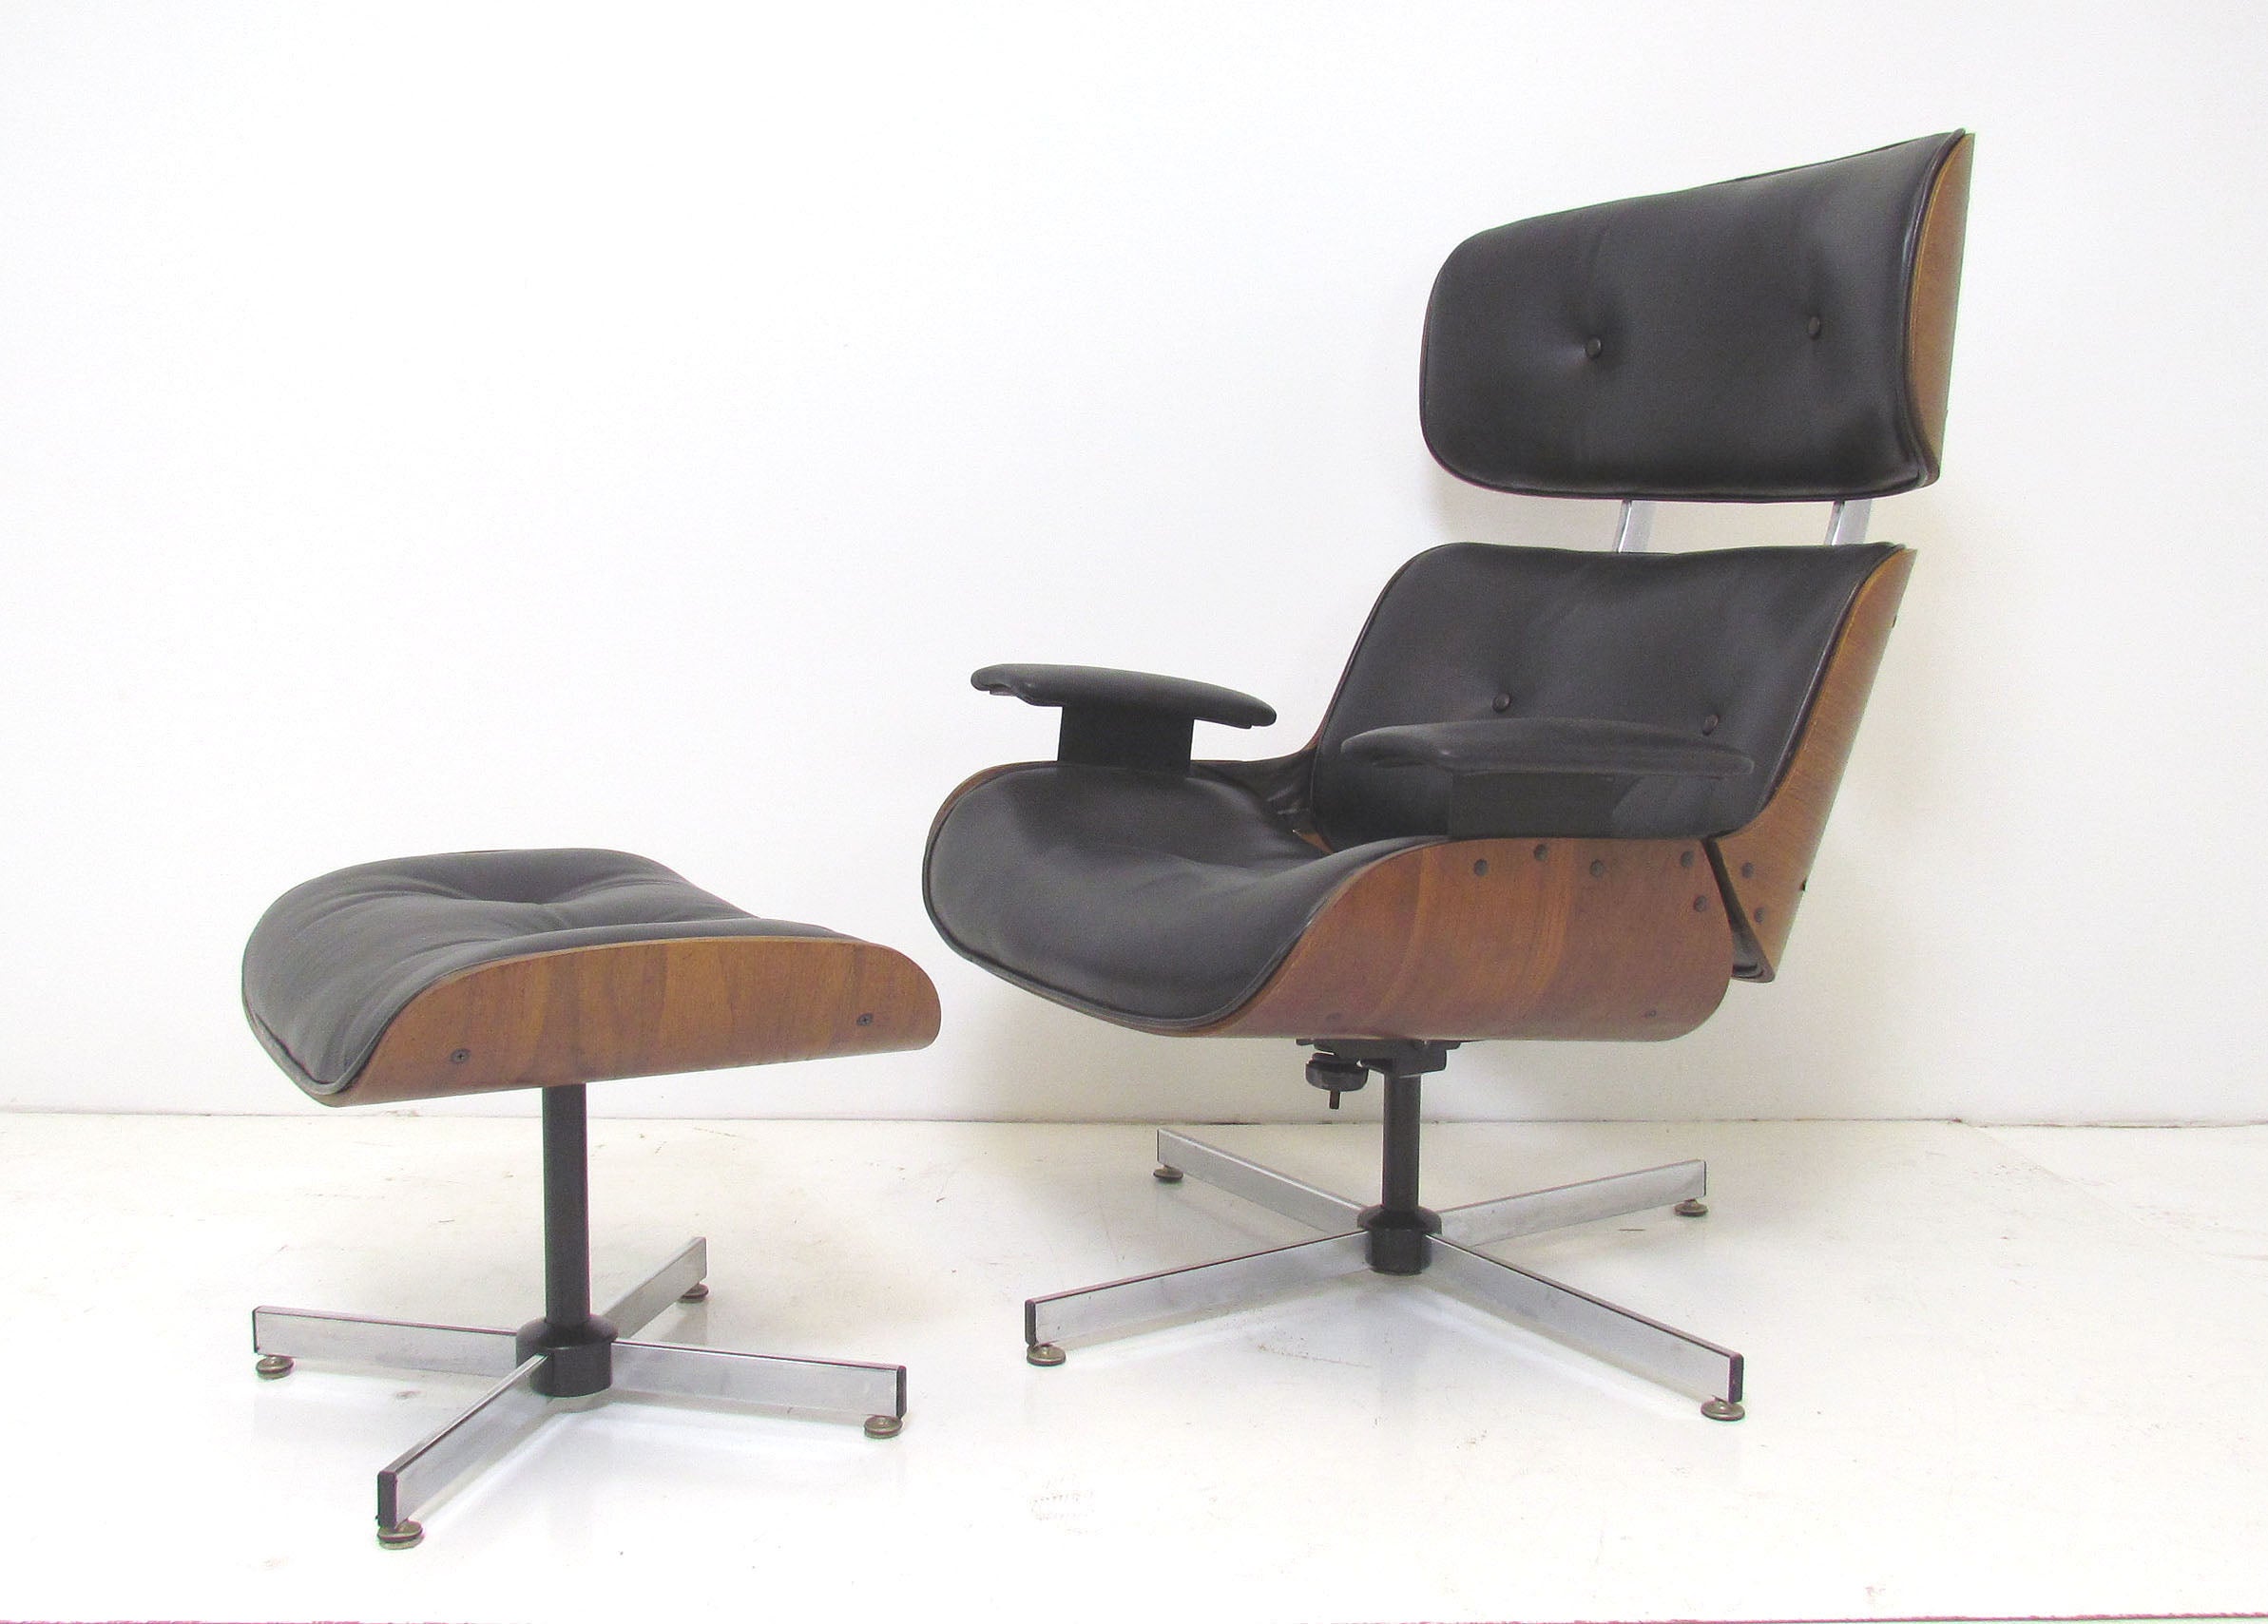 Mid-Century Leather & Walnut High Back Swivel Lounge Chair & Ottoman by Plycraft